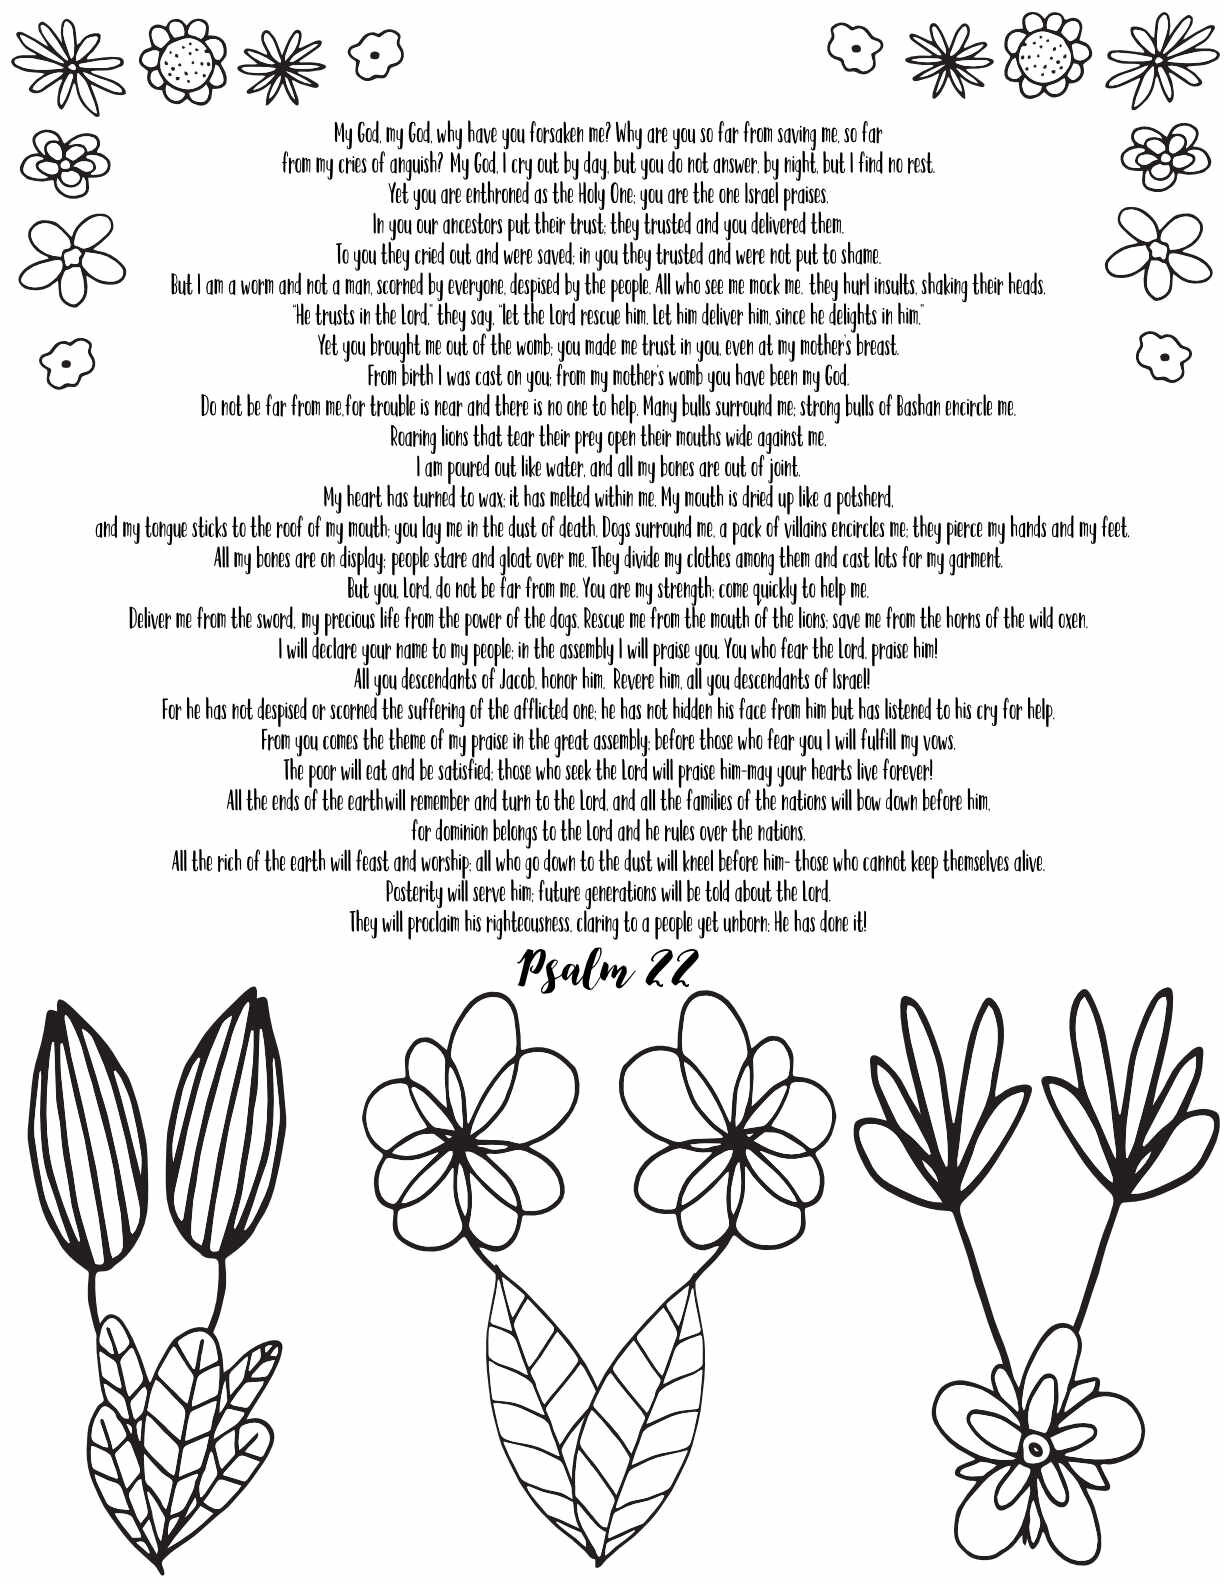 10 Free Printable Psalm Coloring Pages - Download and Color Adult Scripture - Psalm 22CLICK HERE TO DOWNLOAD THIS PAGE FREE